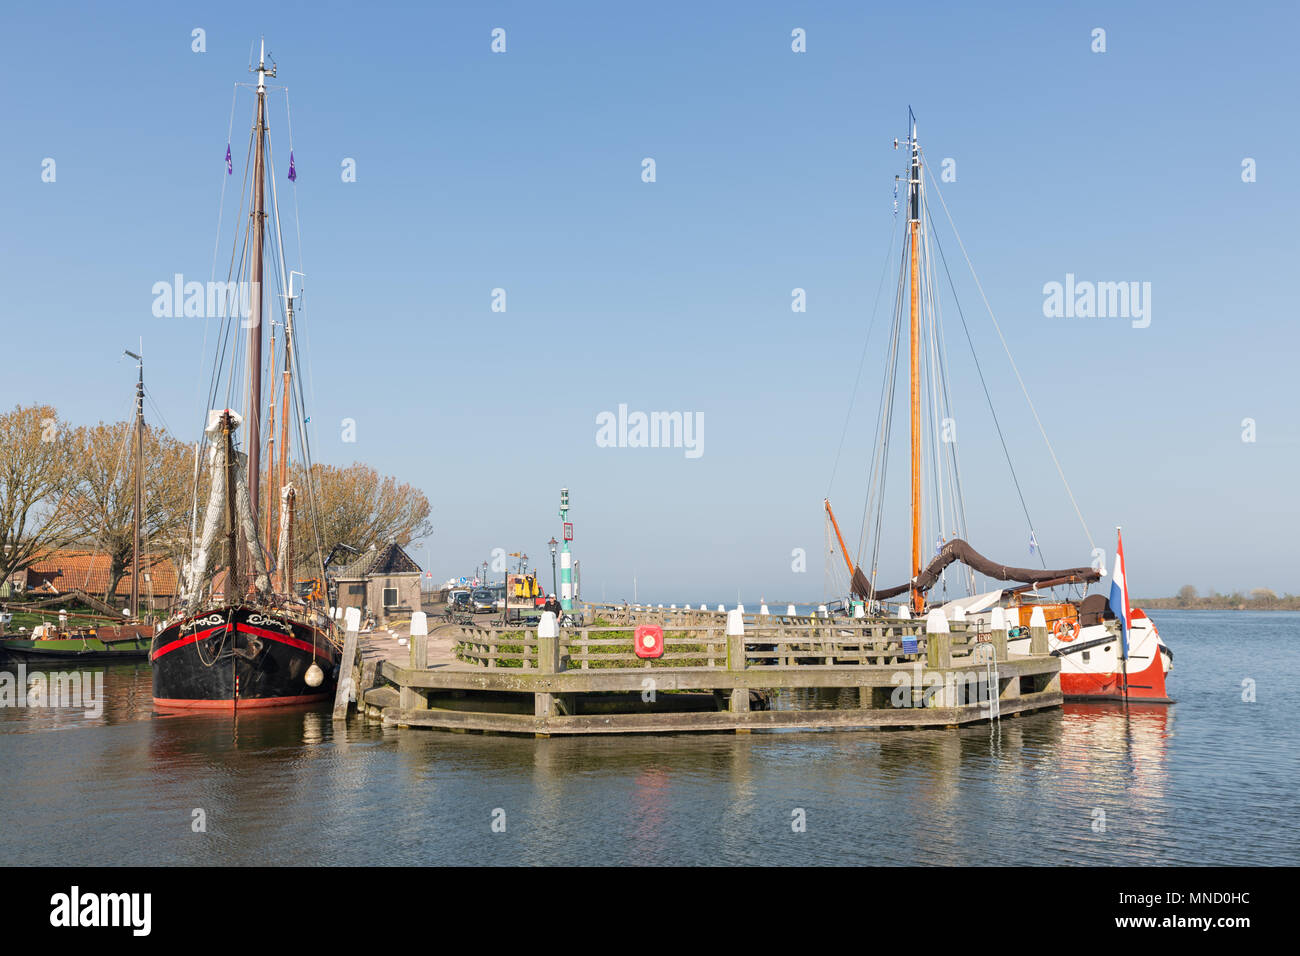 Enkhuizen, The Netherlands - April 20, 2018: Traditional barge in harbor of Enkhuizen with people relaxing in the sun Stock Photo